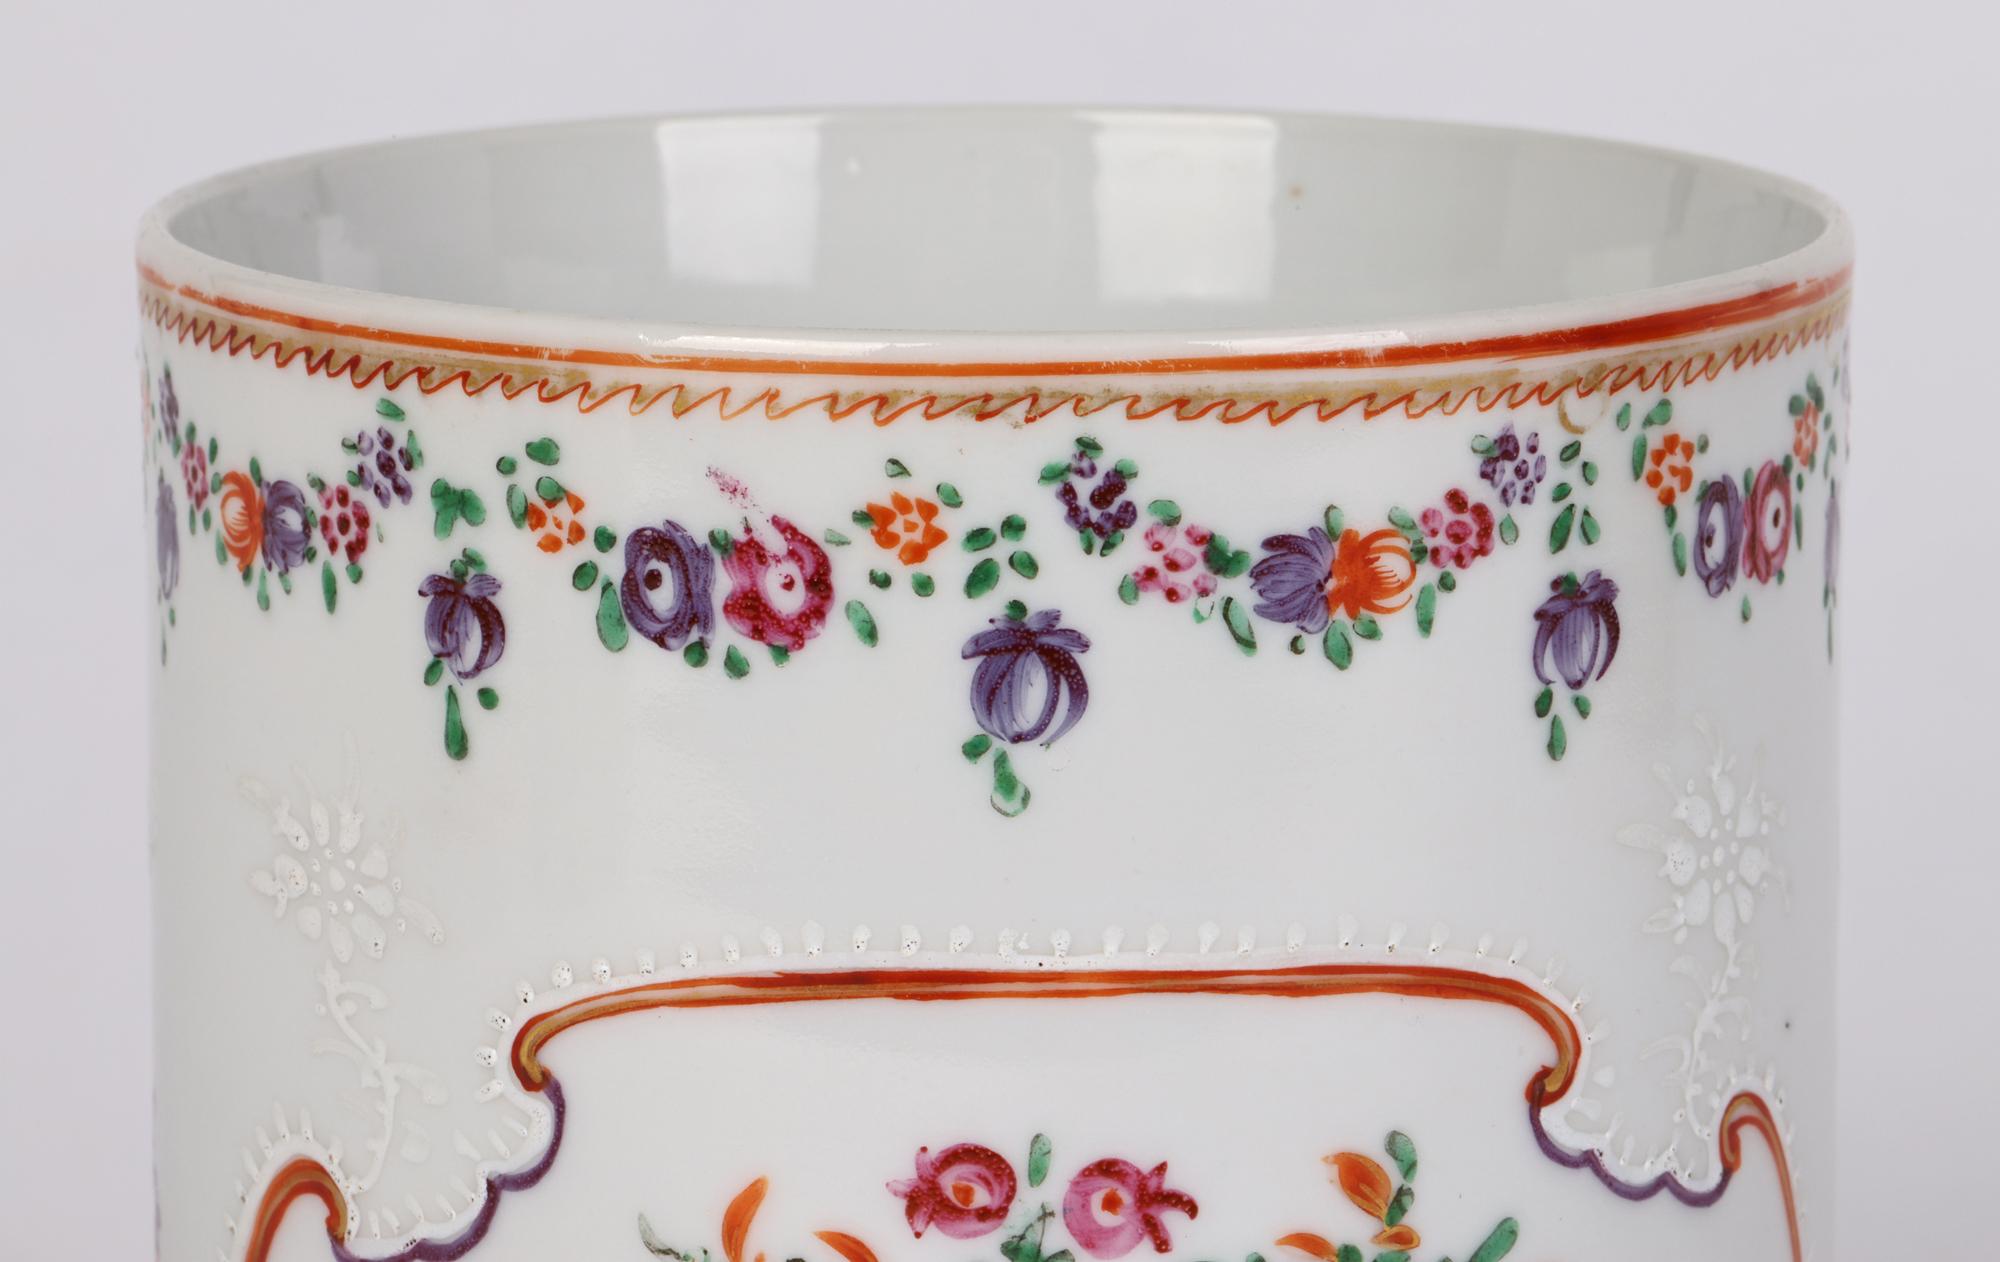 A very fine antique Chinese Qing large porcelain cylindrical mug hand painted with floral designs and probably dating from the latter 18th or possibly even early 19th century. The mug has a flat unglazed base with a wide cylindrical shaped body and